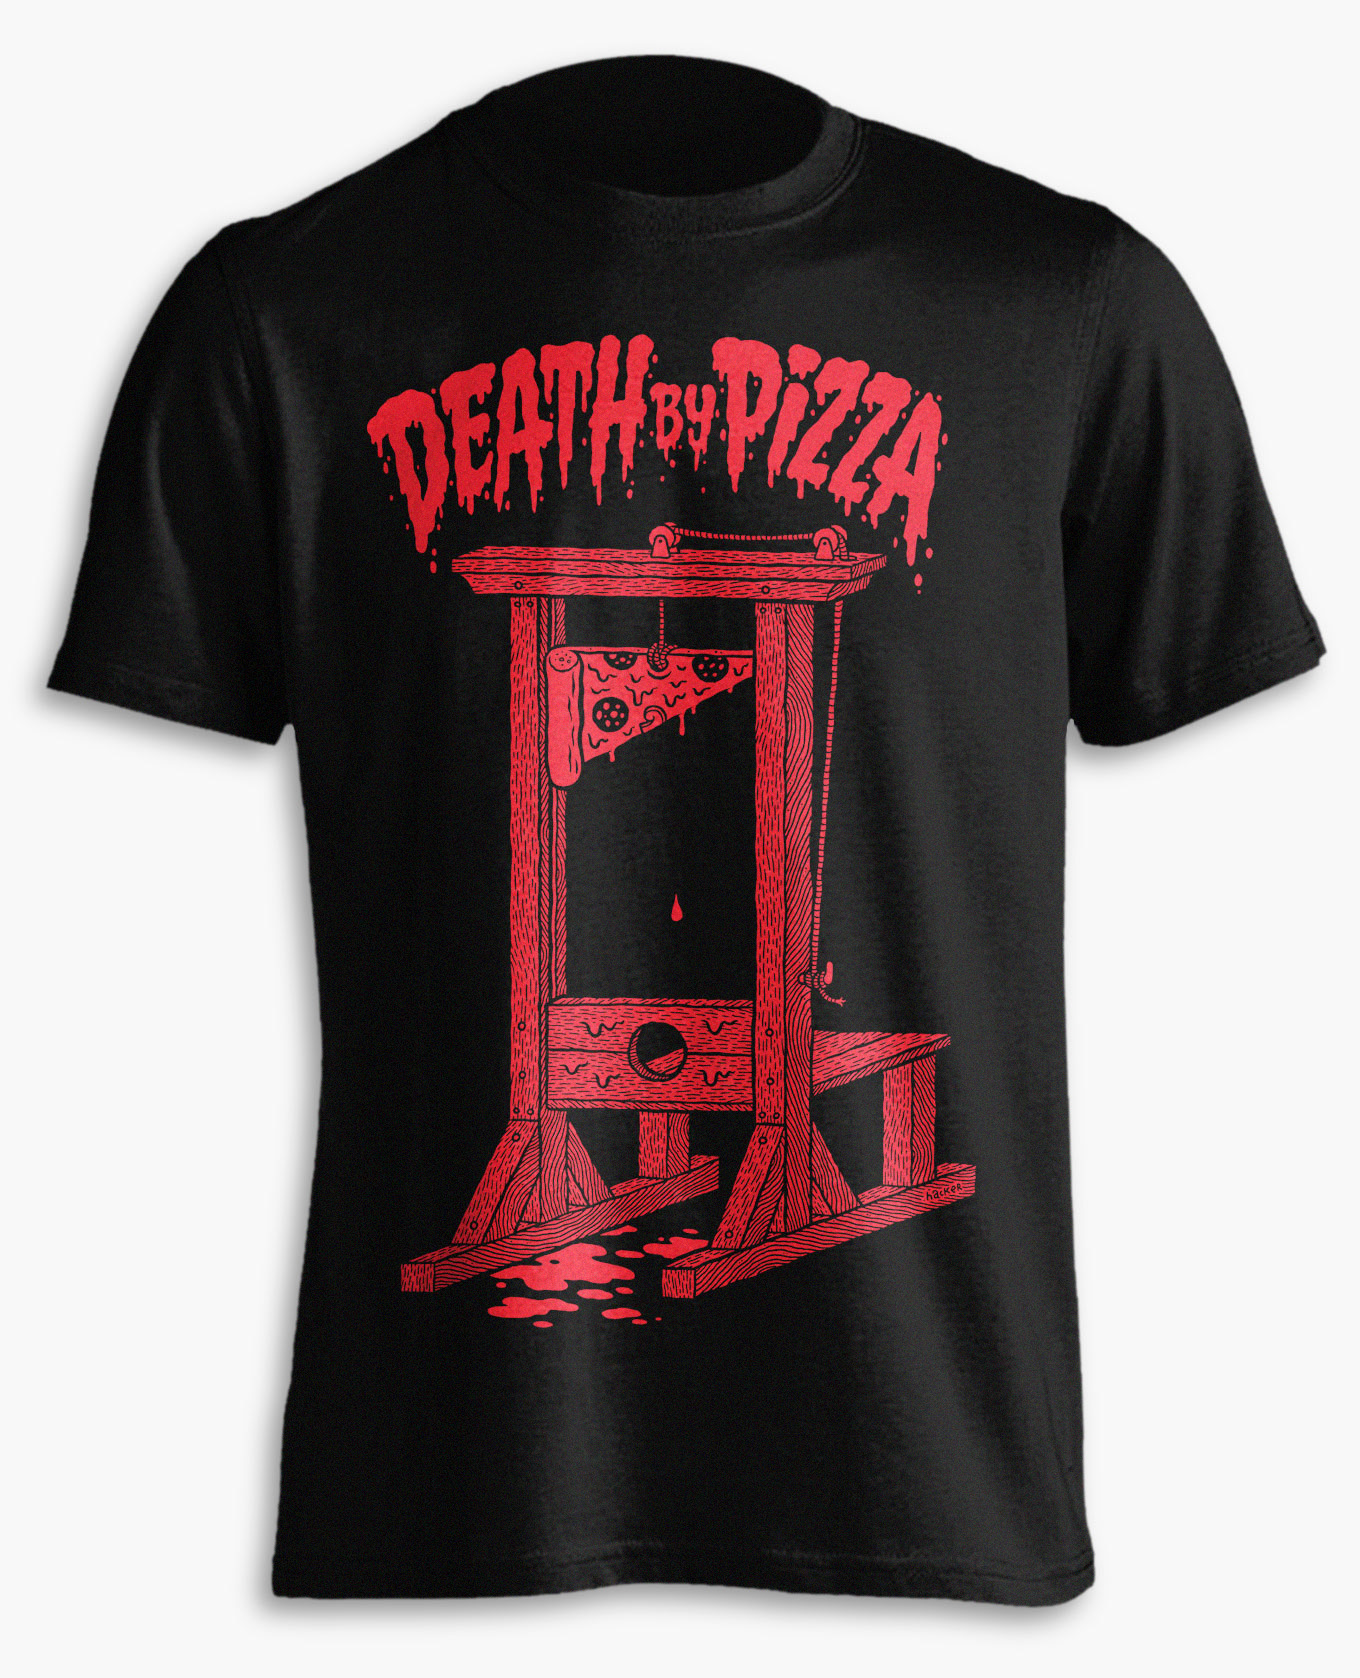 Death By Pizza t-shirt illustration